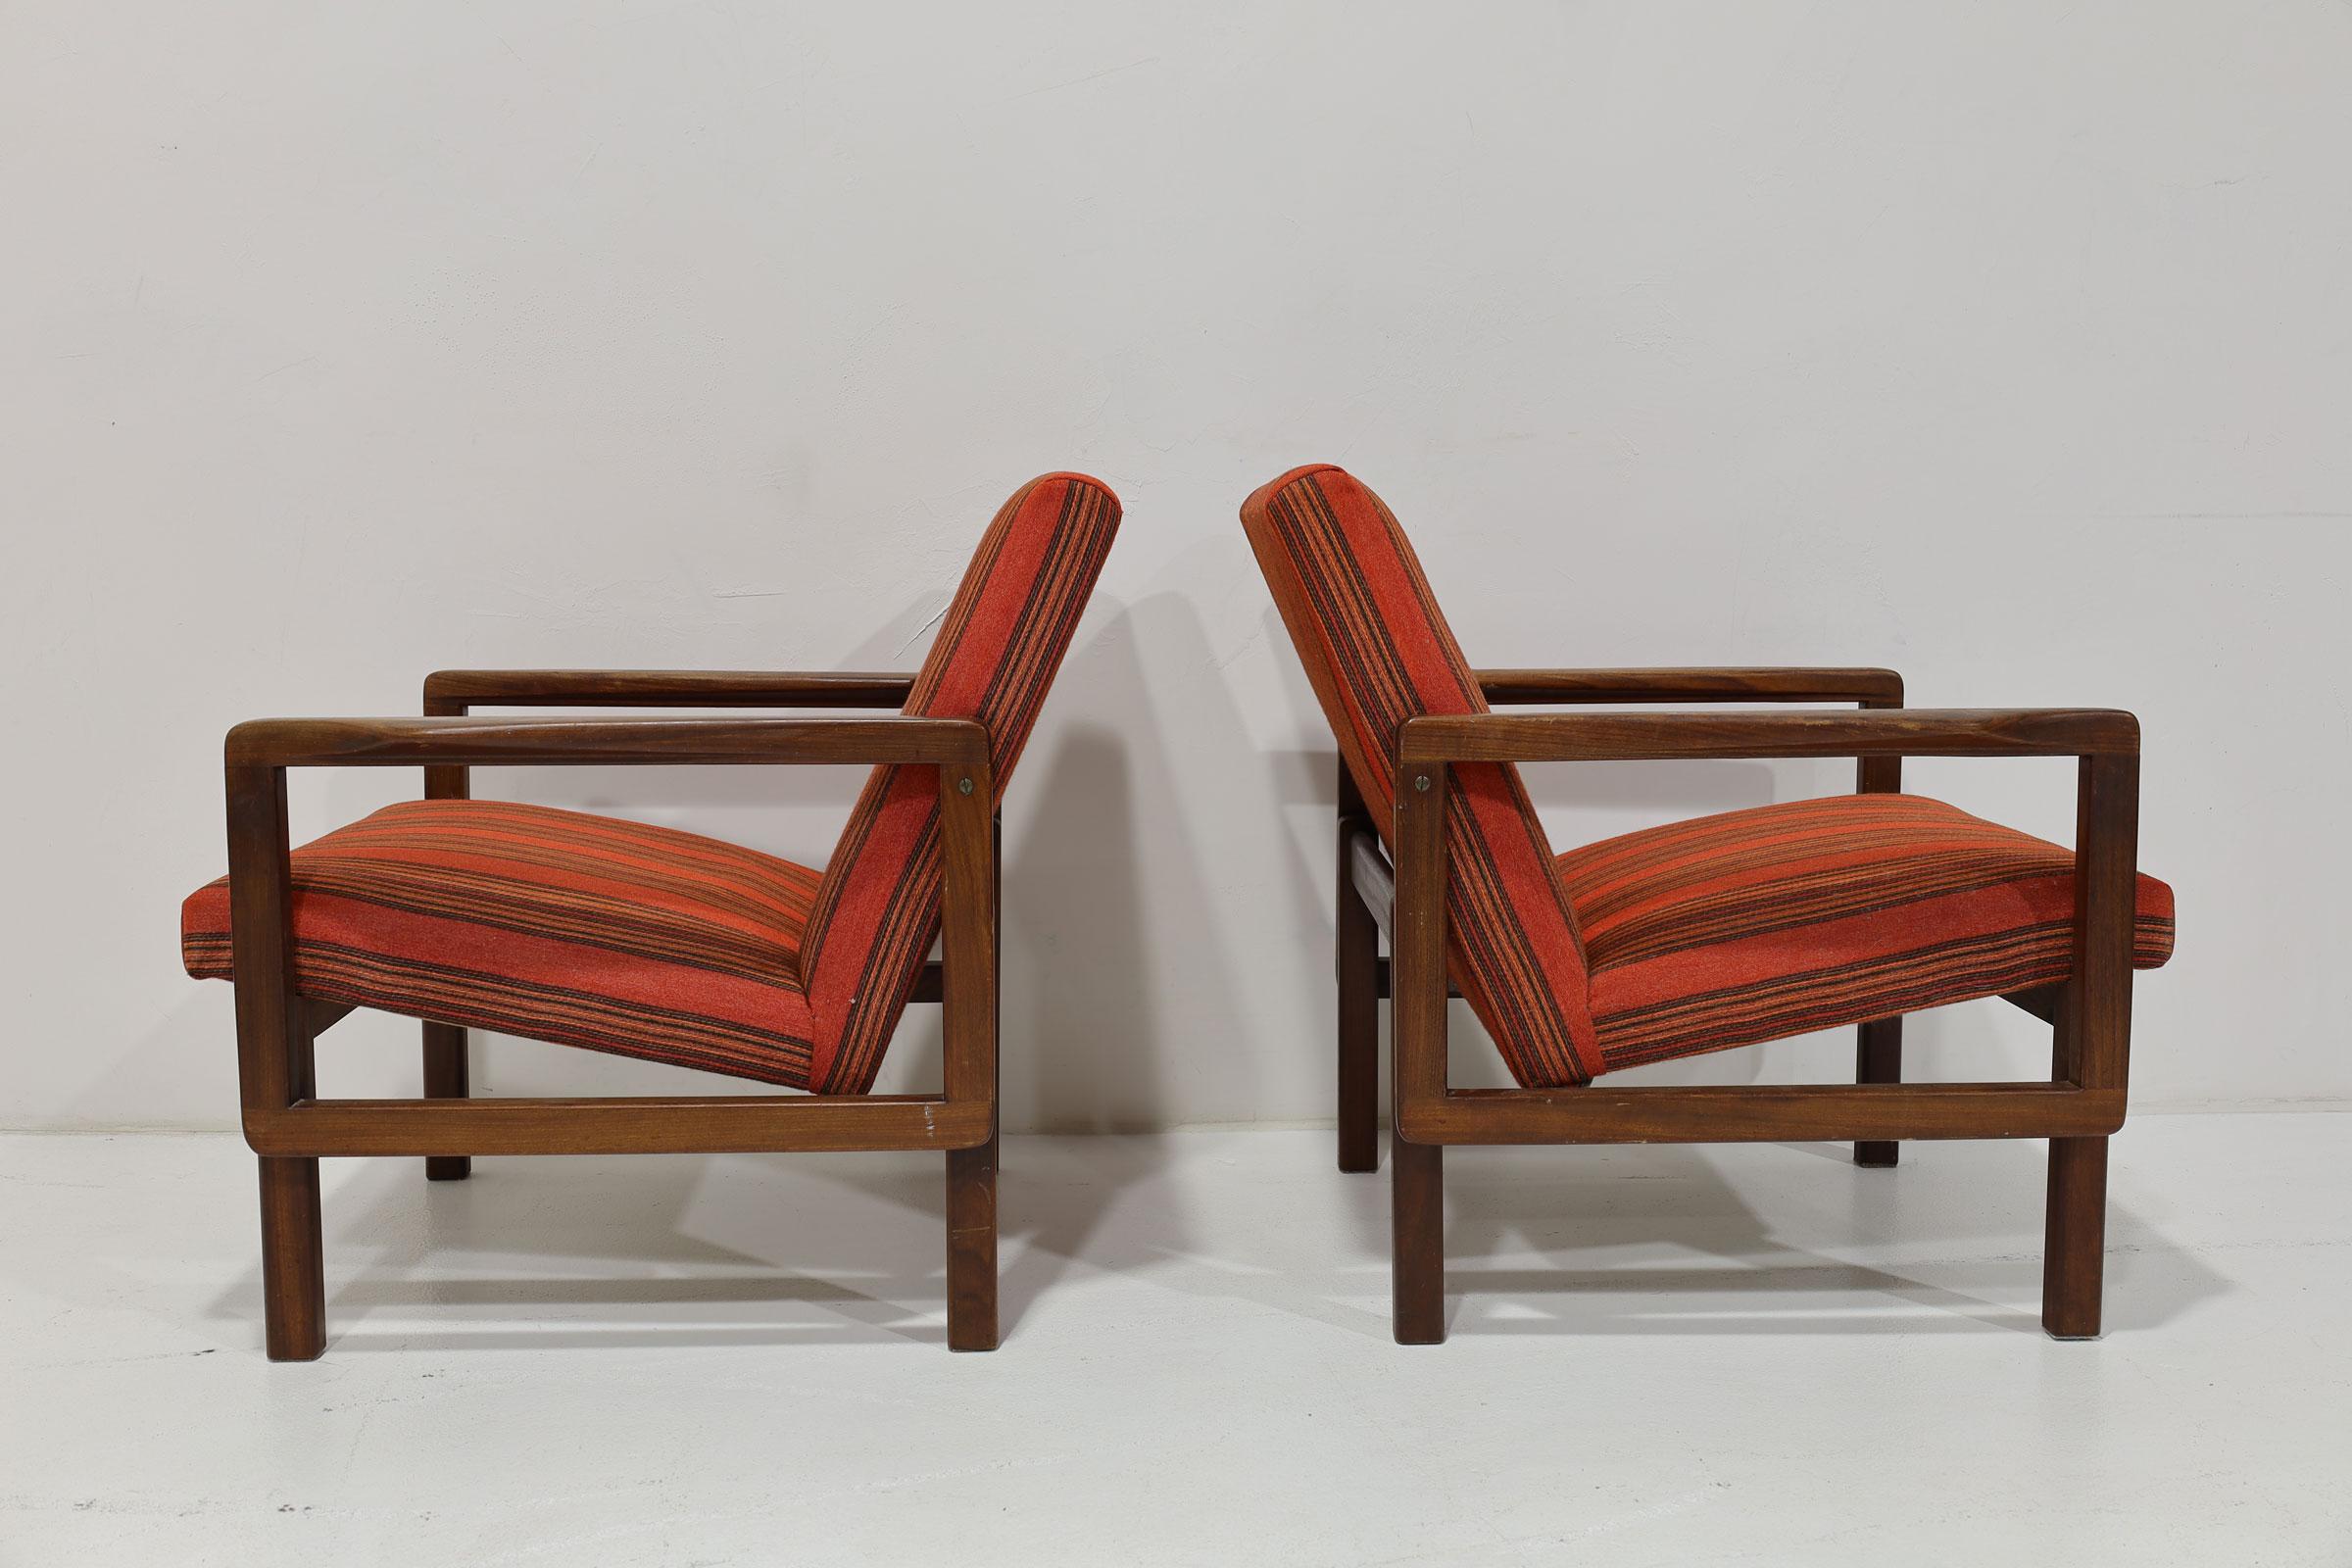 Beautiful pair of lounge chairs by Aulis Leinonen. These are teak with beautiful joinery and a handsome striped fabric that I believe is wool. A rare set. 